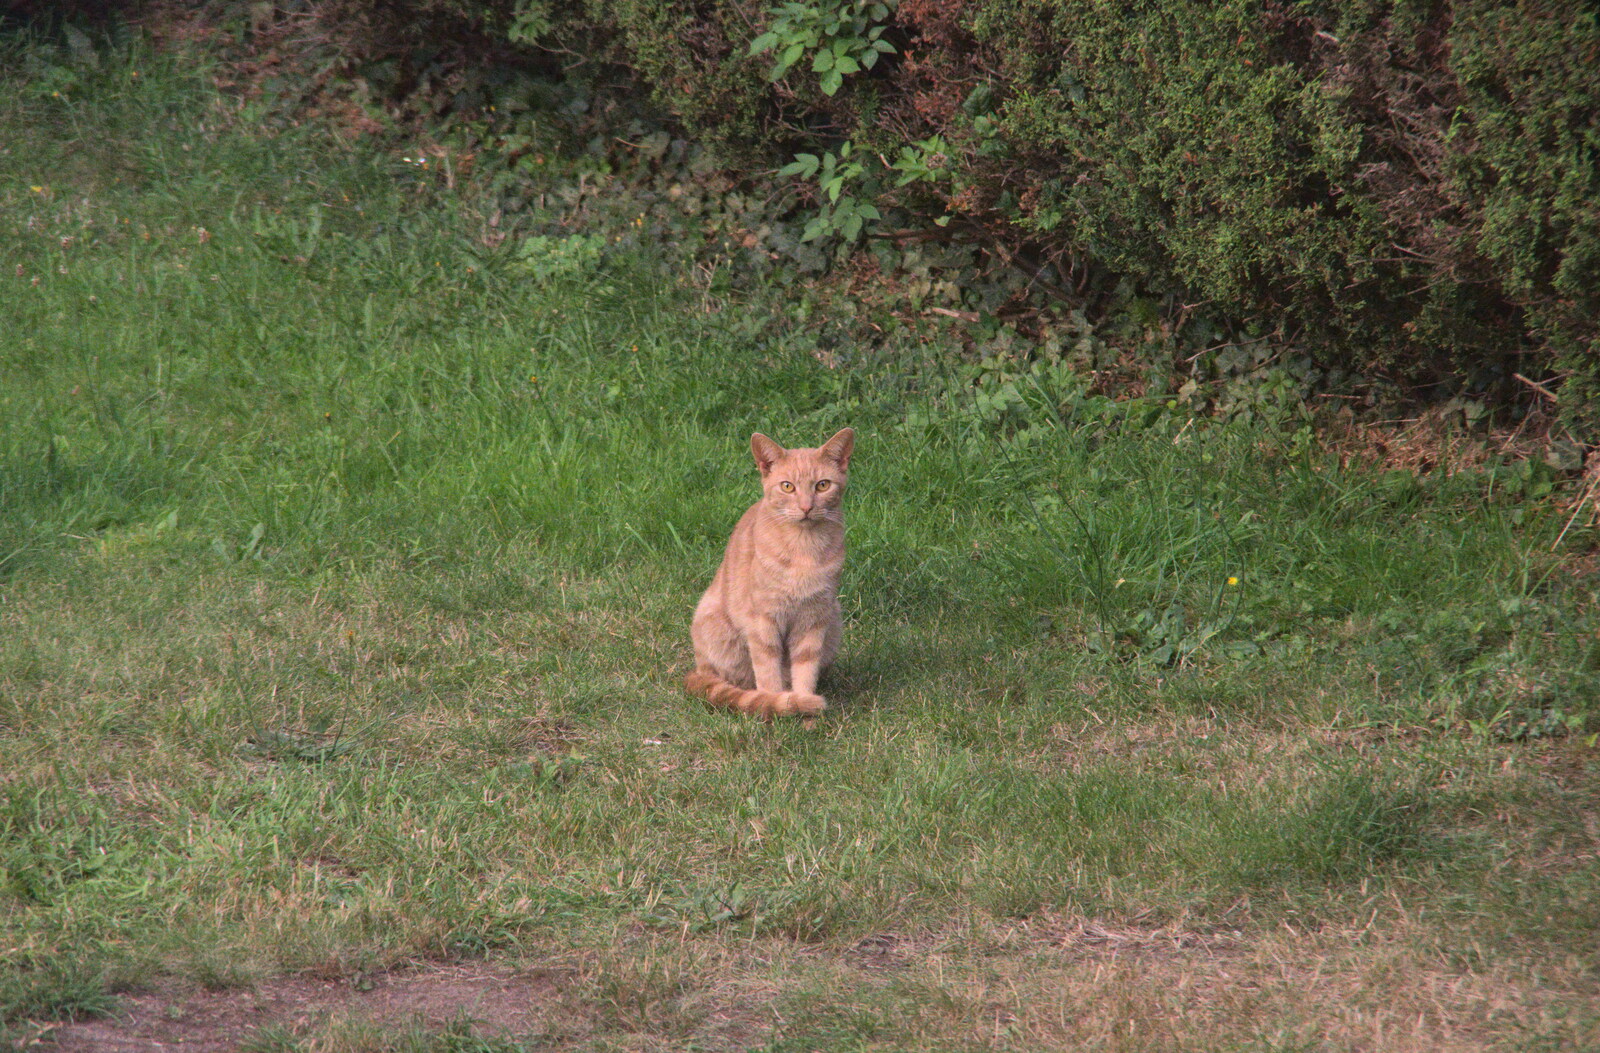 A stripey ginger pub cat from Eye Airfield with Mick the Brick, Eye, Suffolk - 5th August 2020